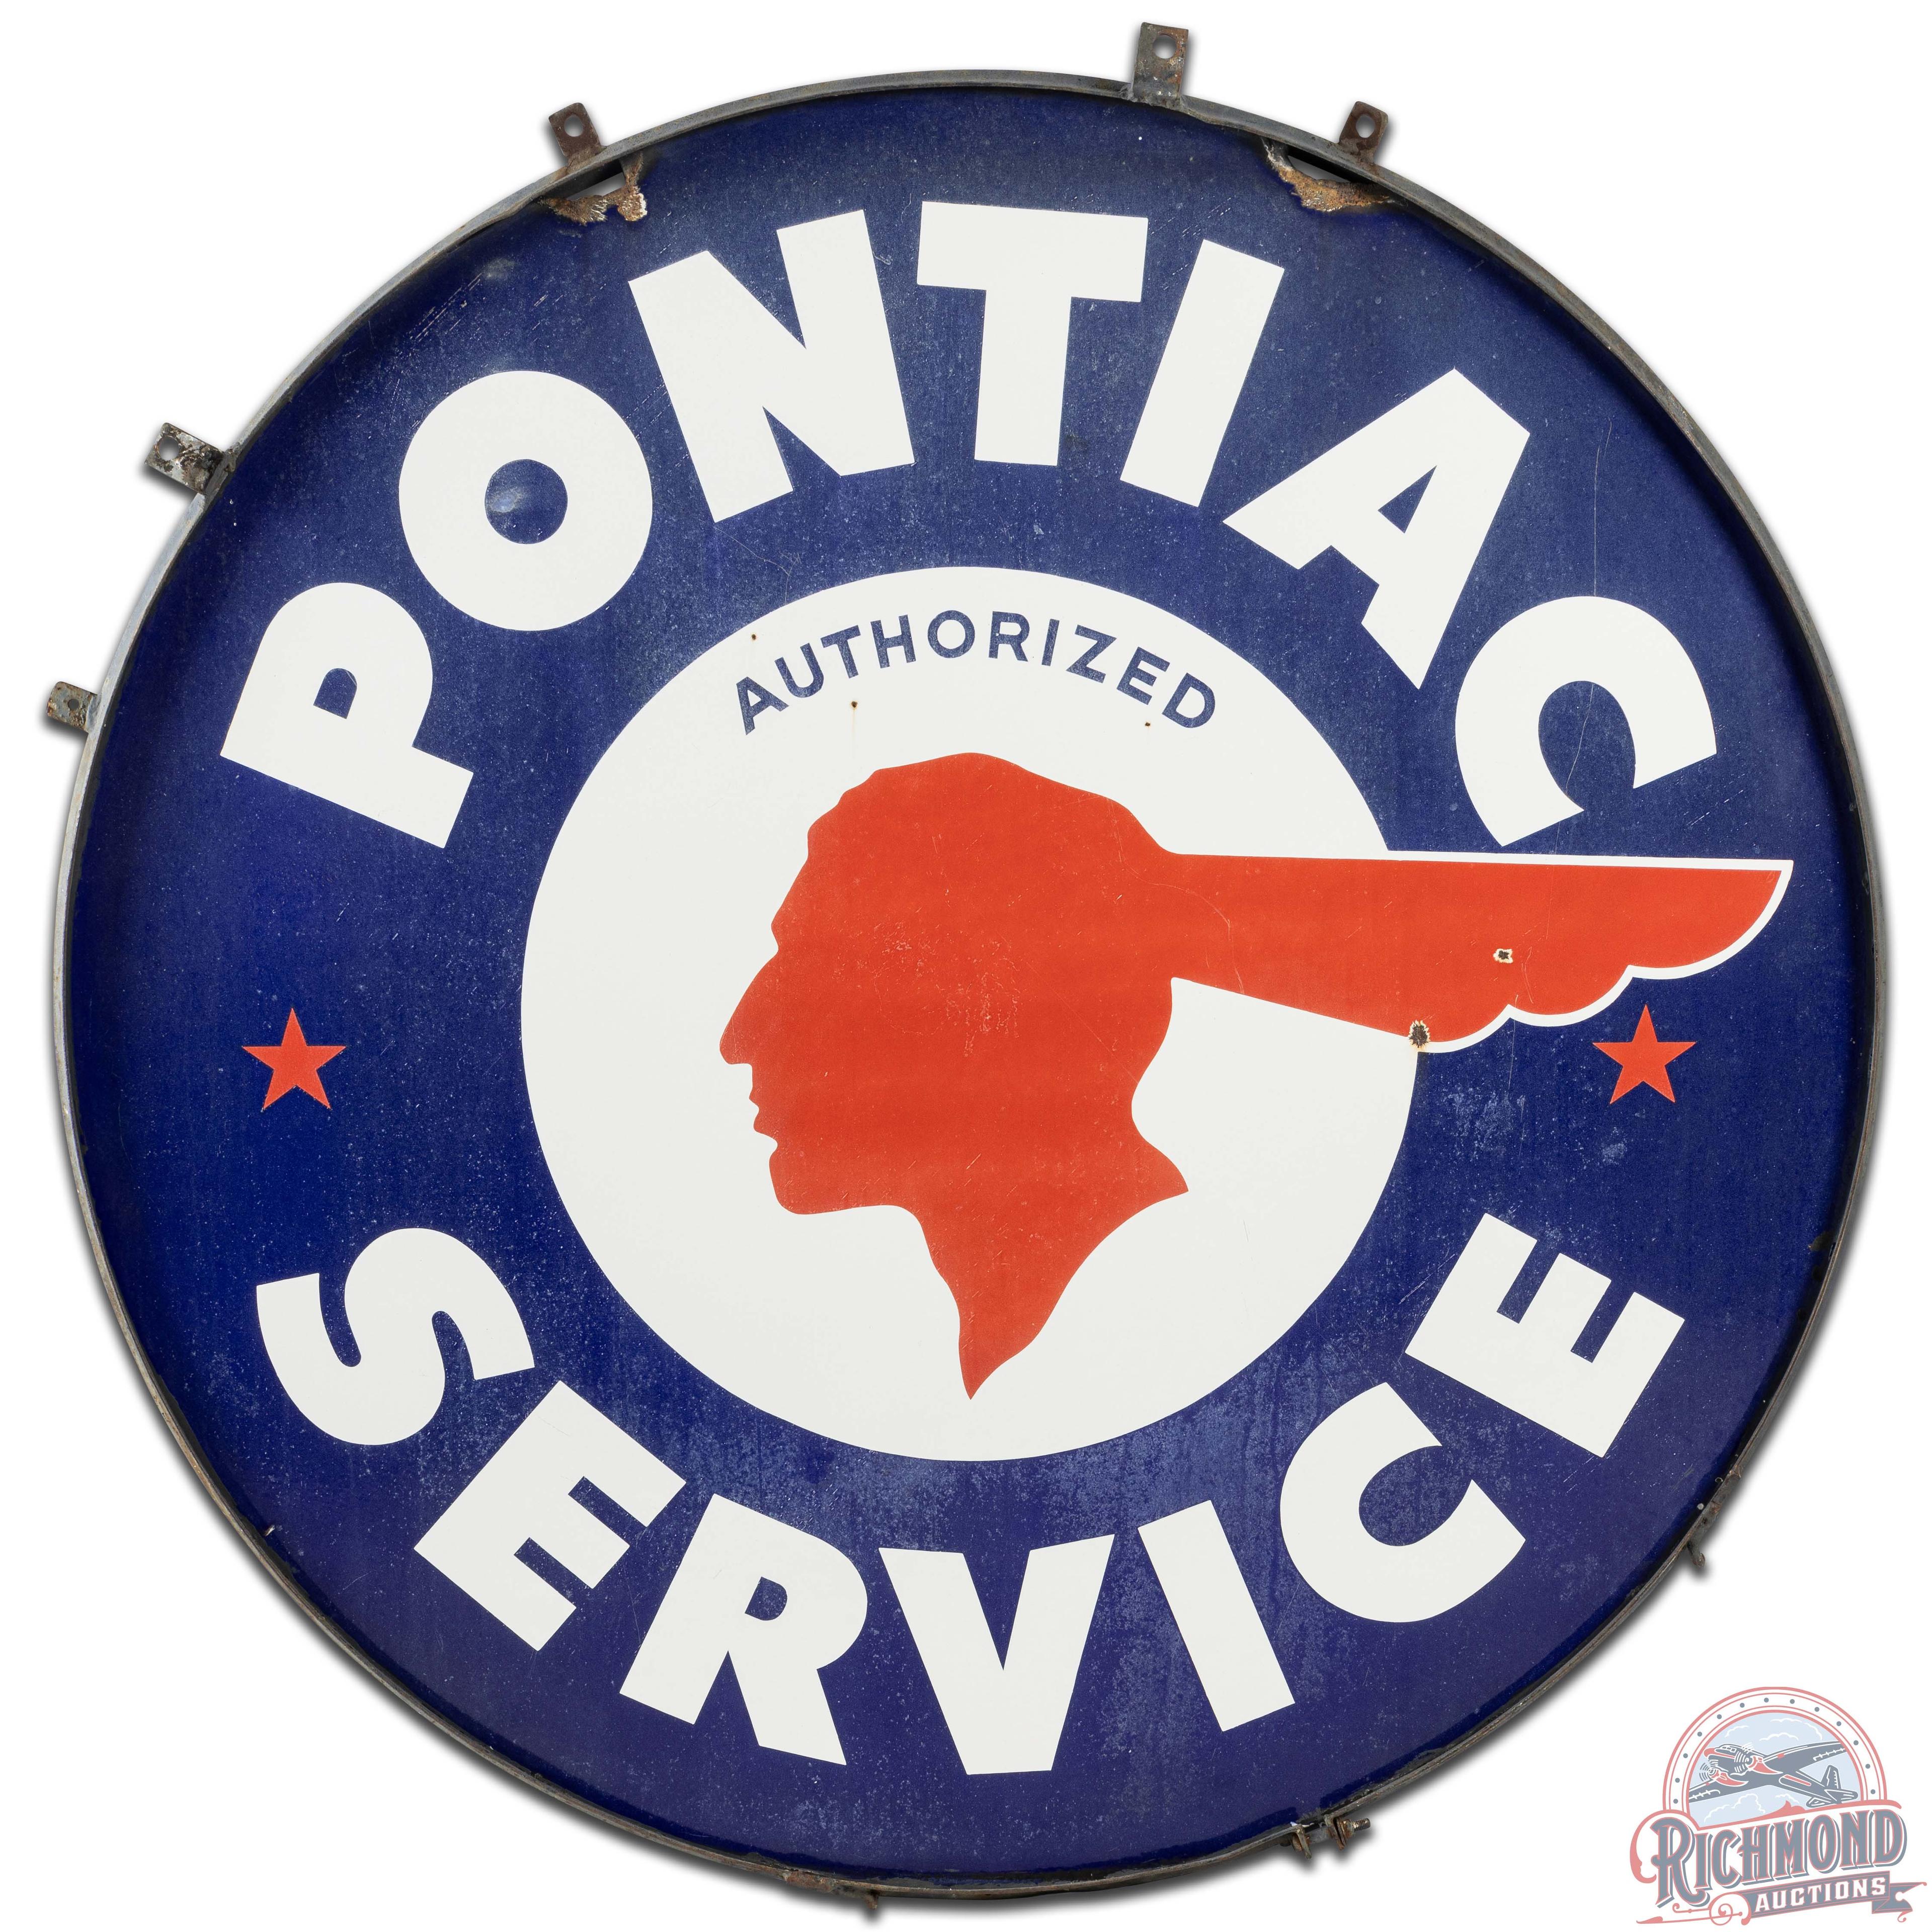 Pontiac Authorized Service 60" DS Porcelain Sign w/ Ring Full Feather